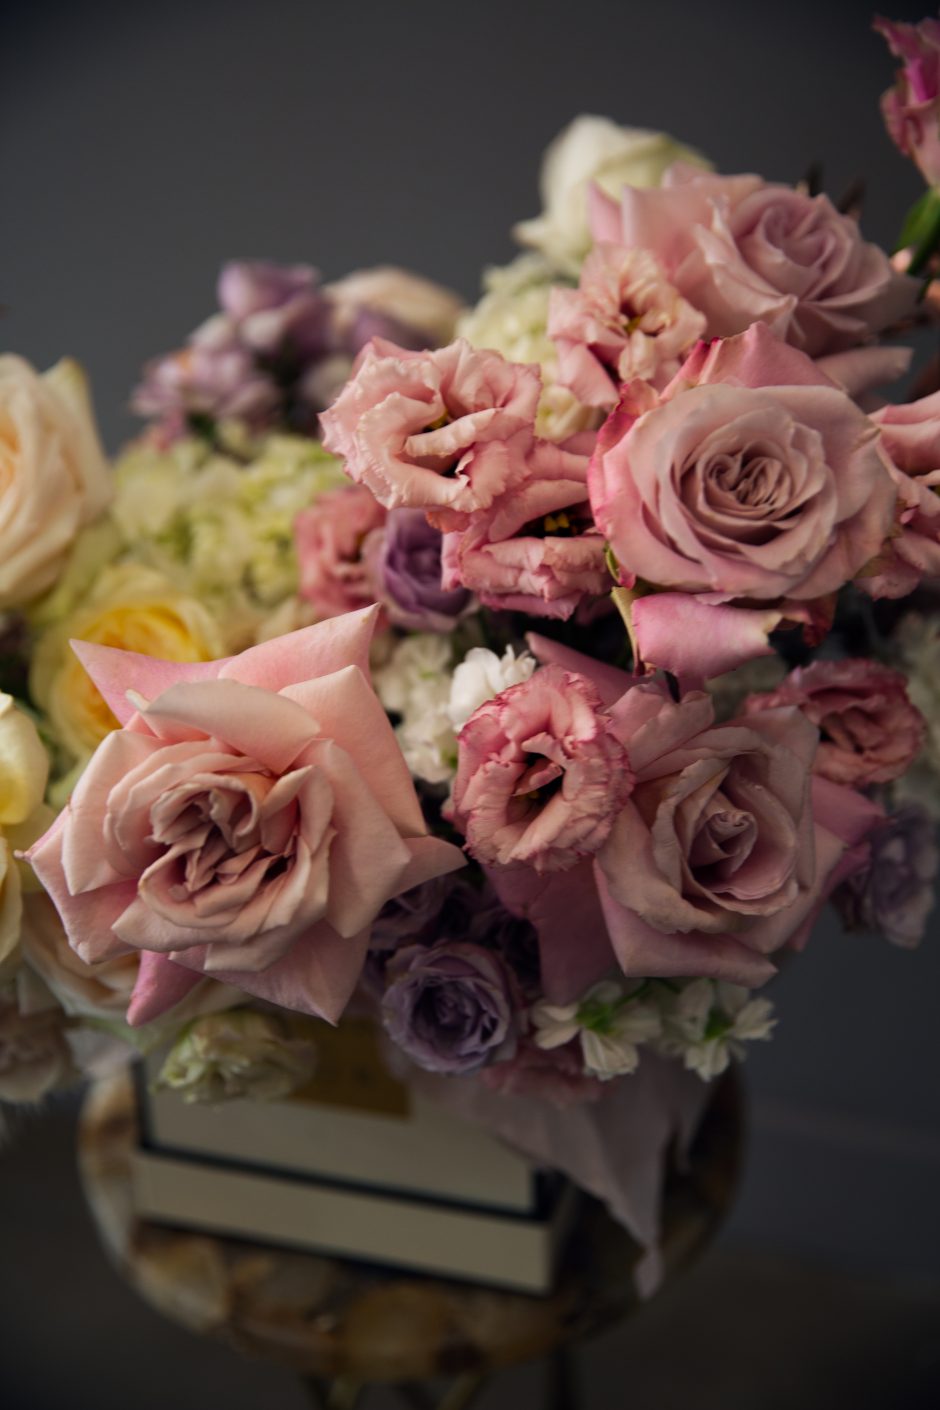 Pastel Mixed Roses in Vase